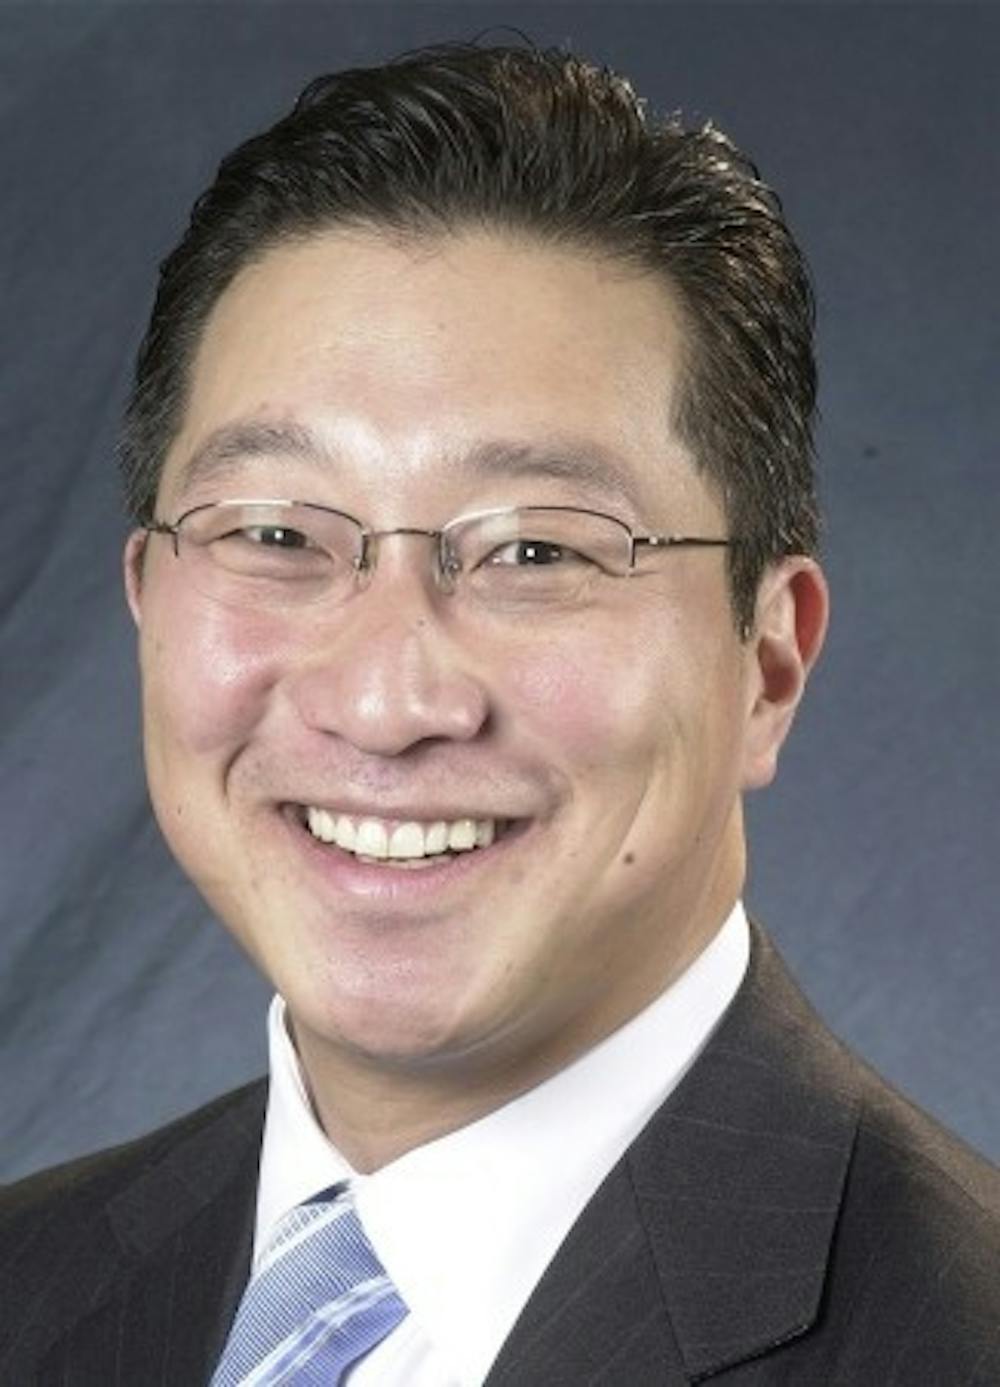 	<p>Emil Kang, Executive director for the arts at <span class="caps">UNC</span> was nominated by President Obama to serve on the National Council on the Arts.</p>